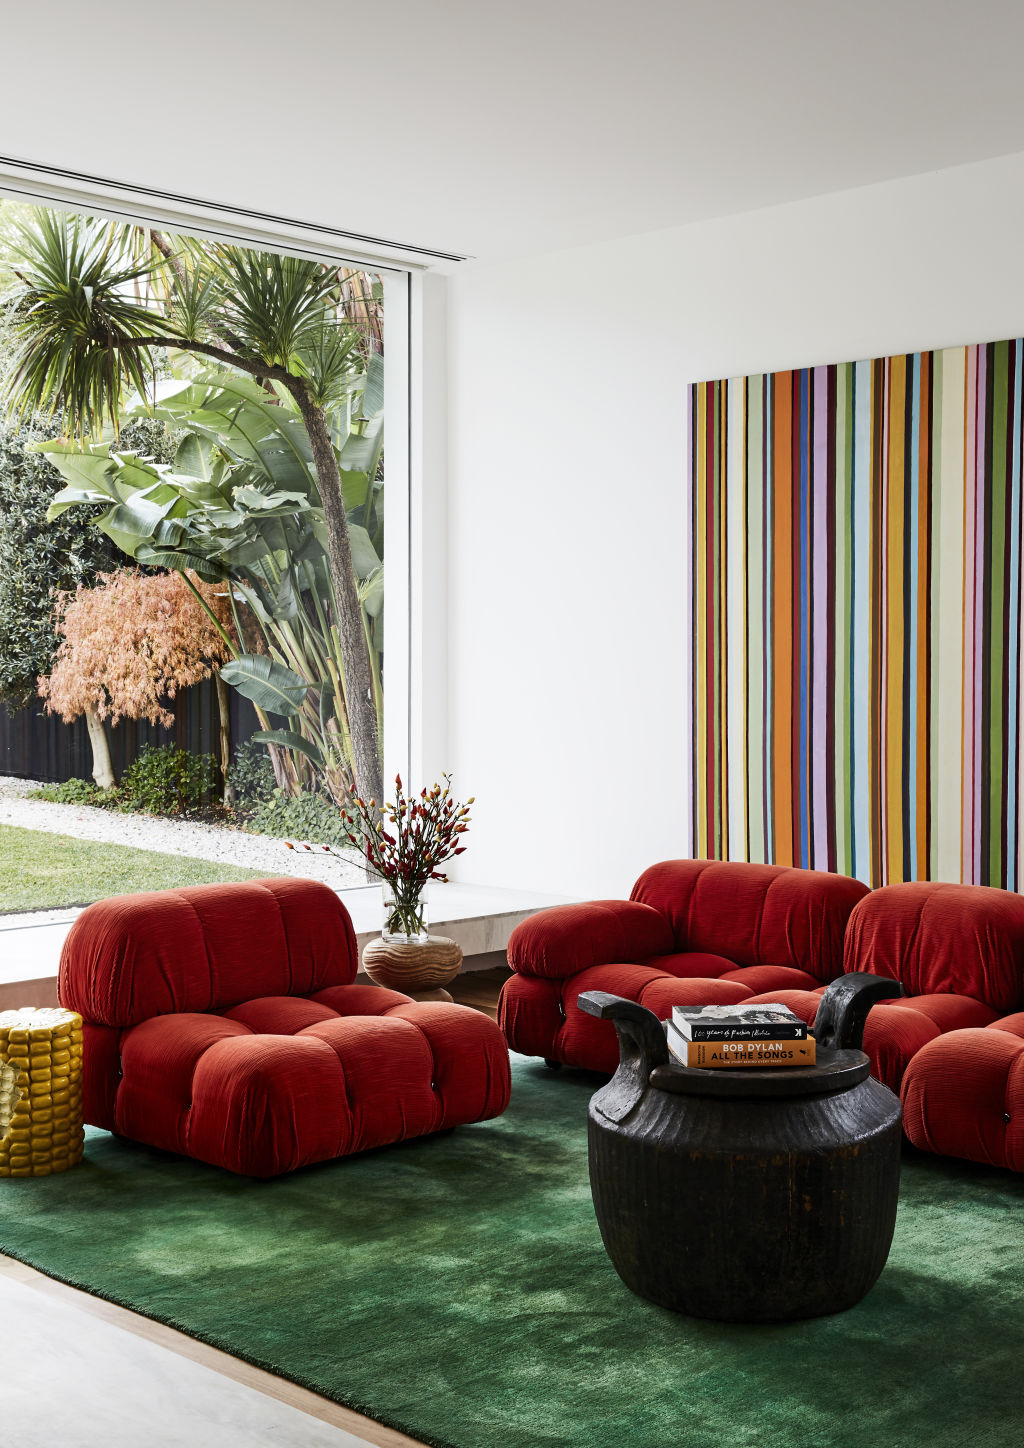 51 Red Living Rooms With Tips And Accessories To Help You Decorate